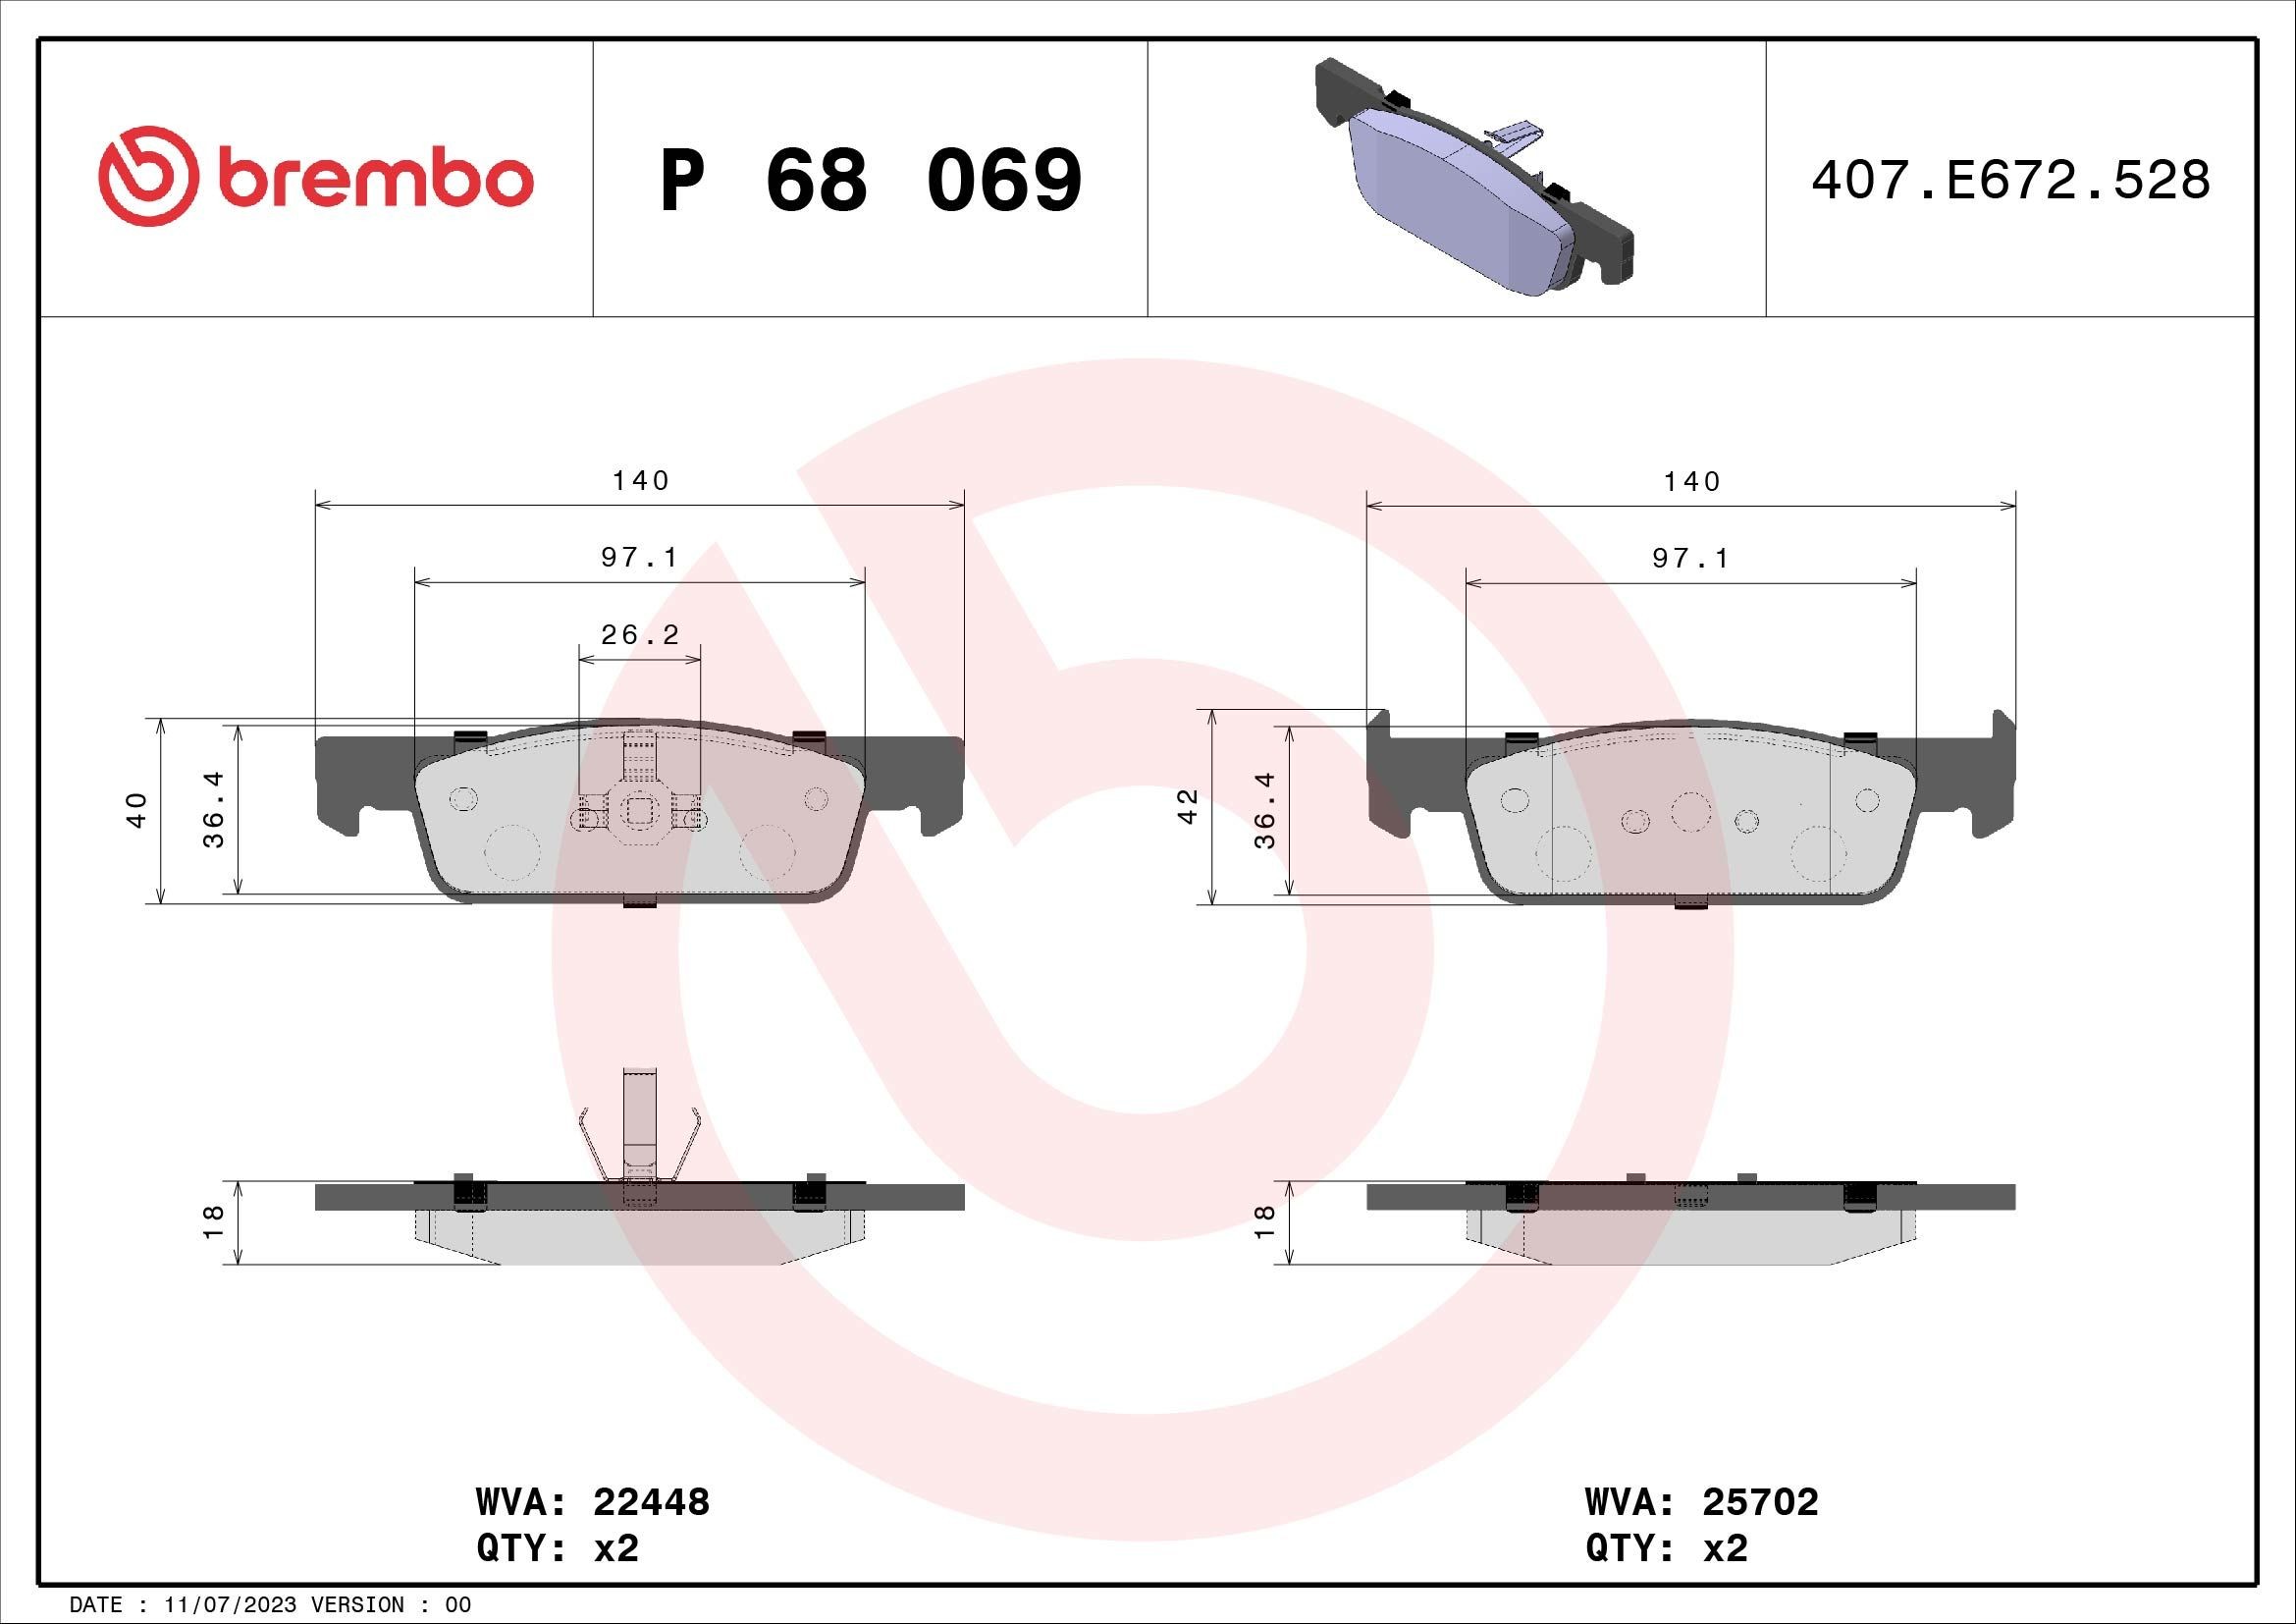 P 68 069 BREMBO Brake pad set DACIA excl. wear warning contact, without accessories